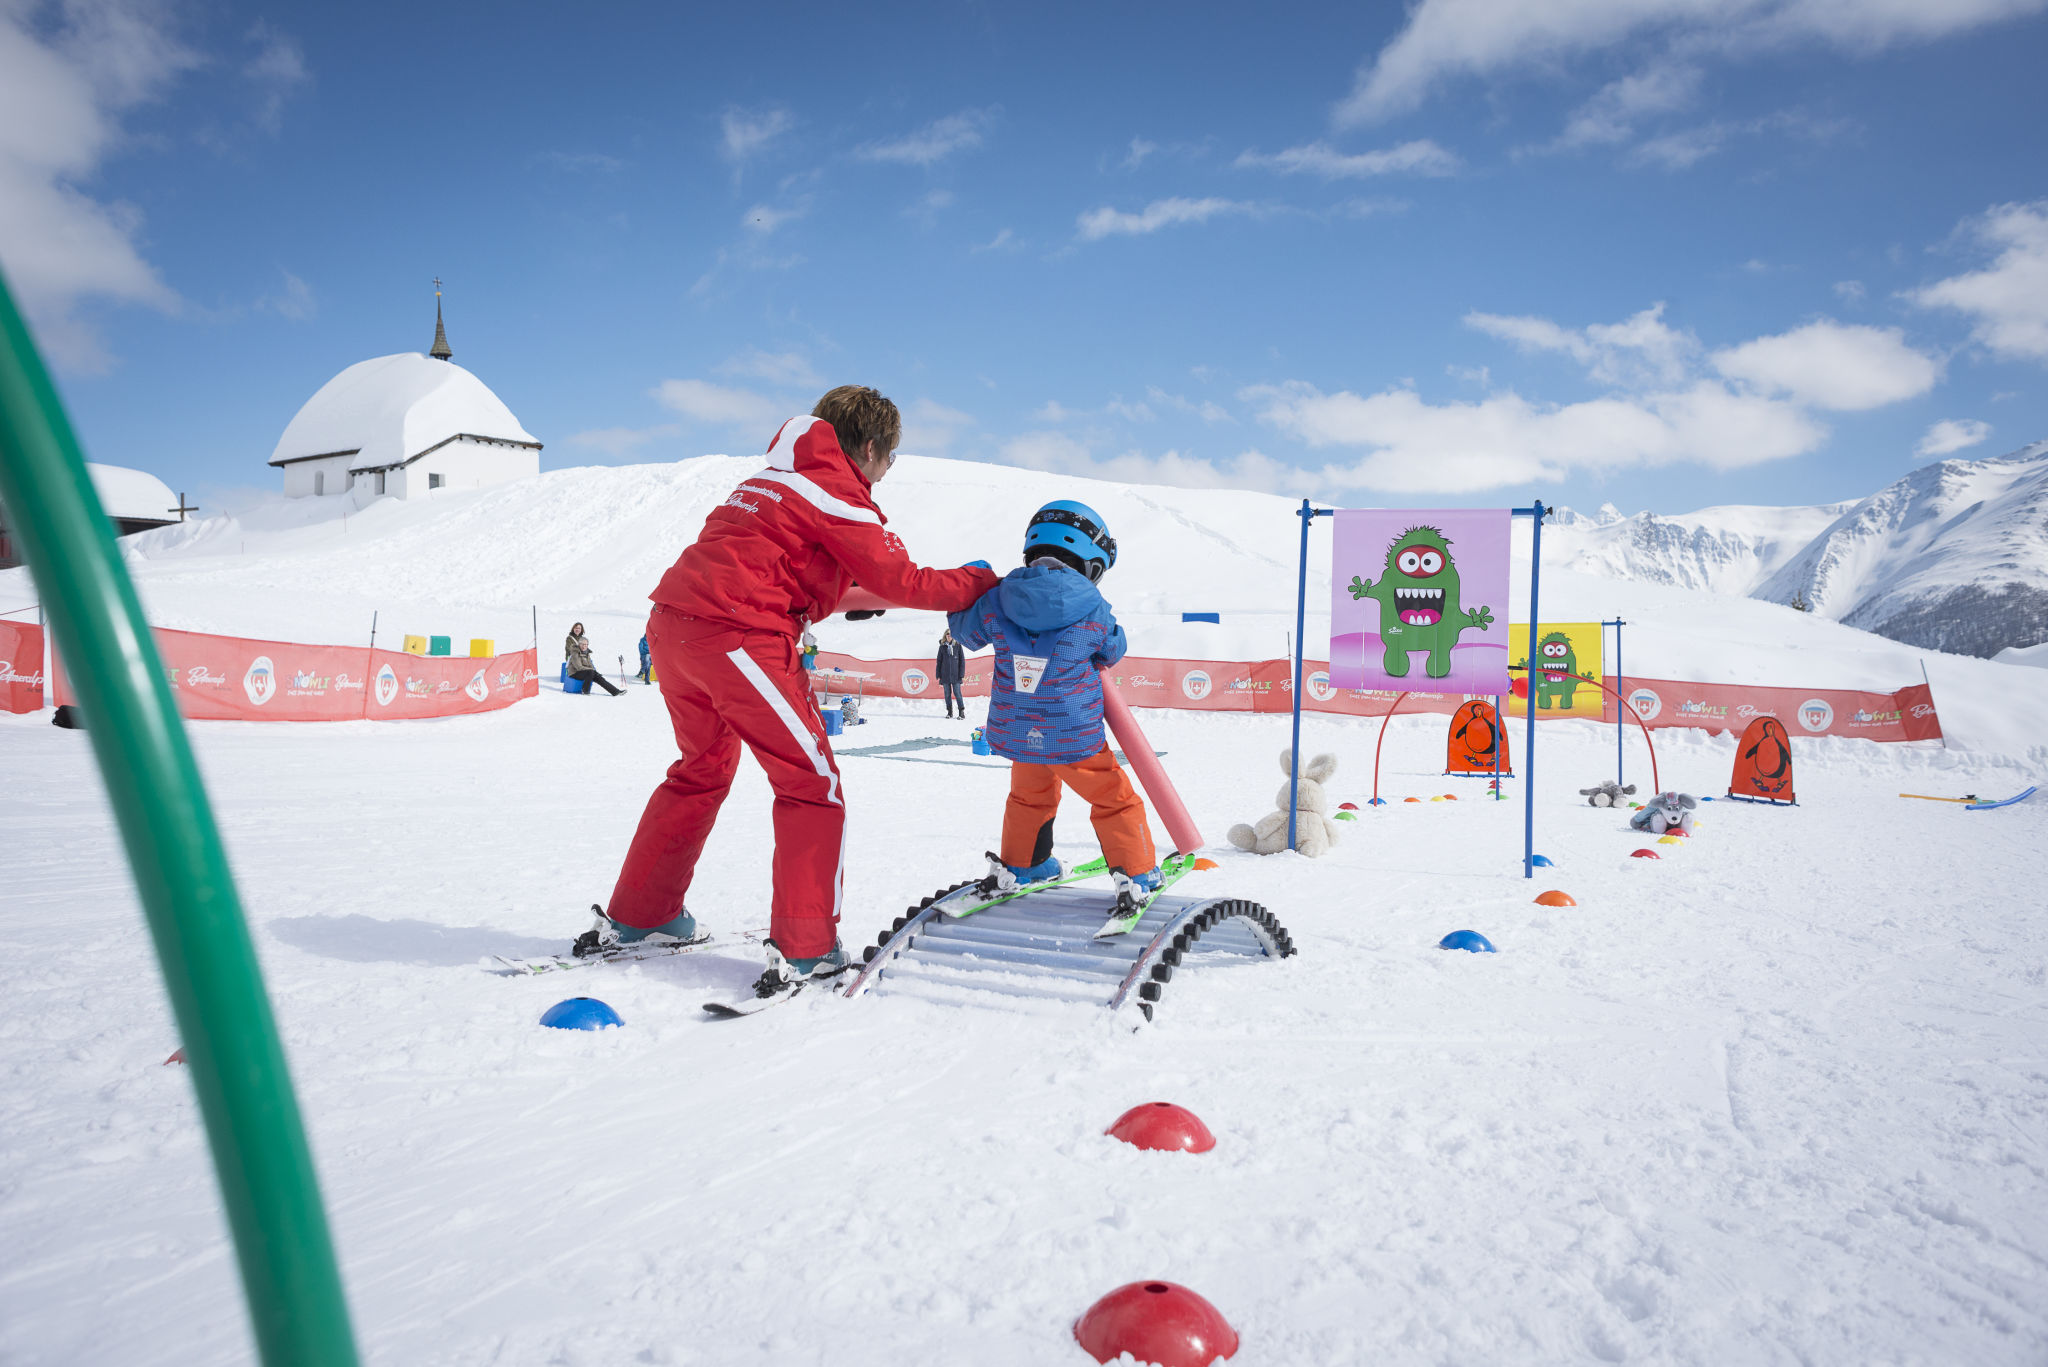 A small child learns to ski in Bettmeralp's Children's snow playground with the help of his instructor